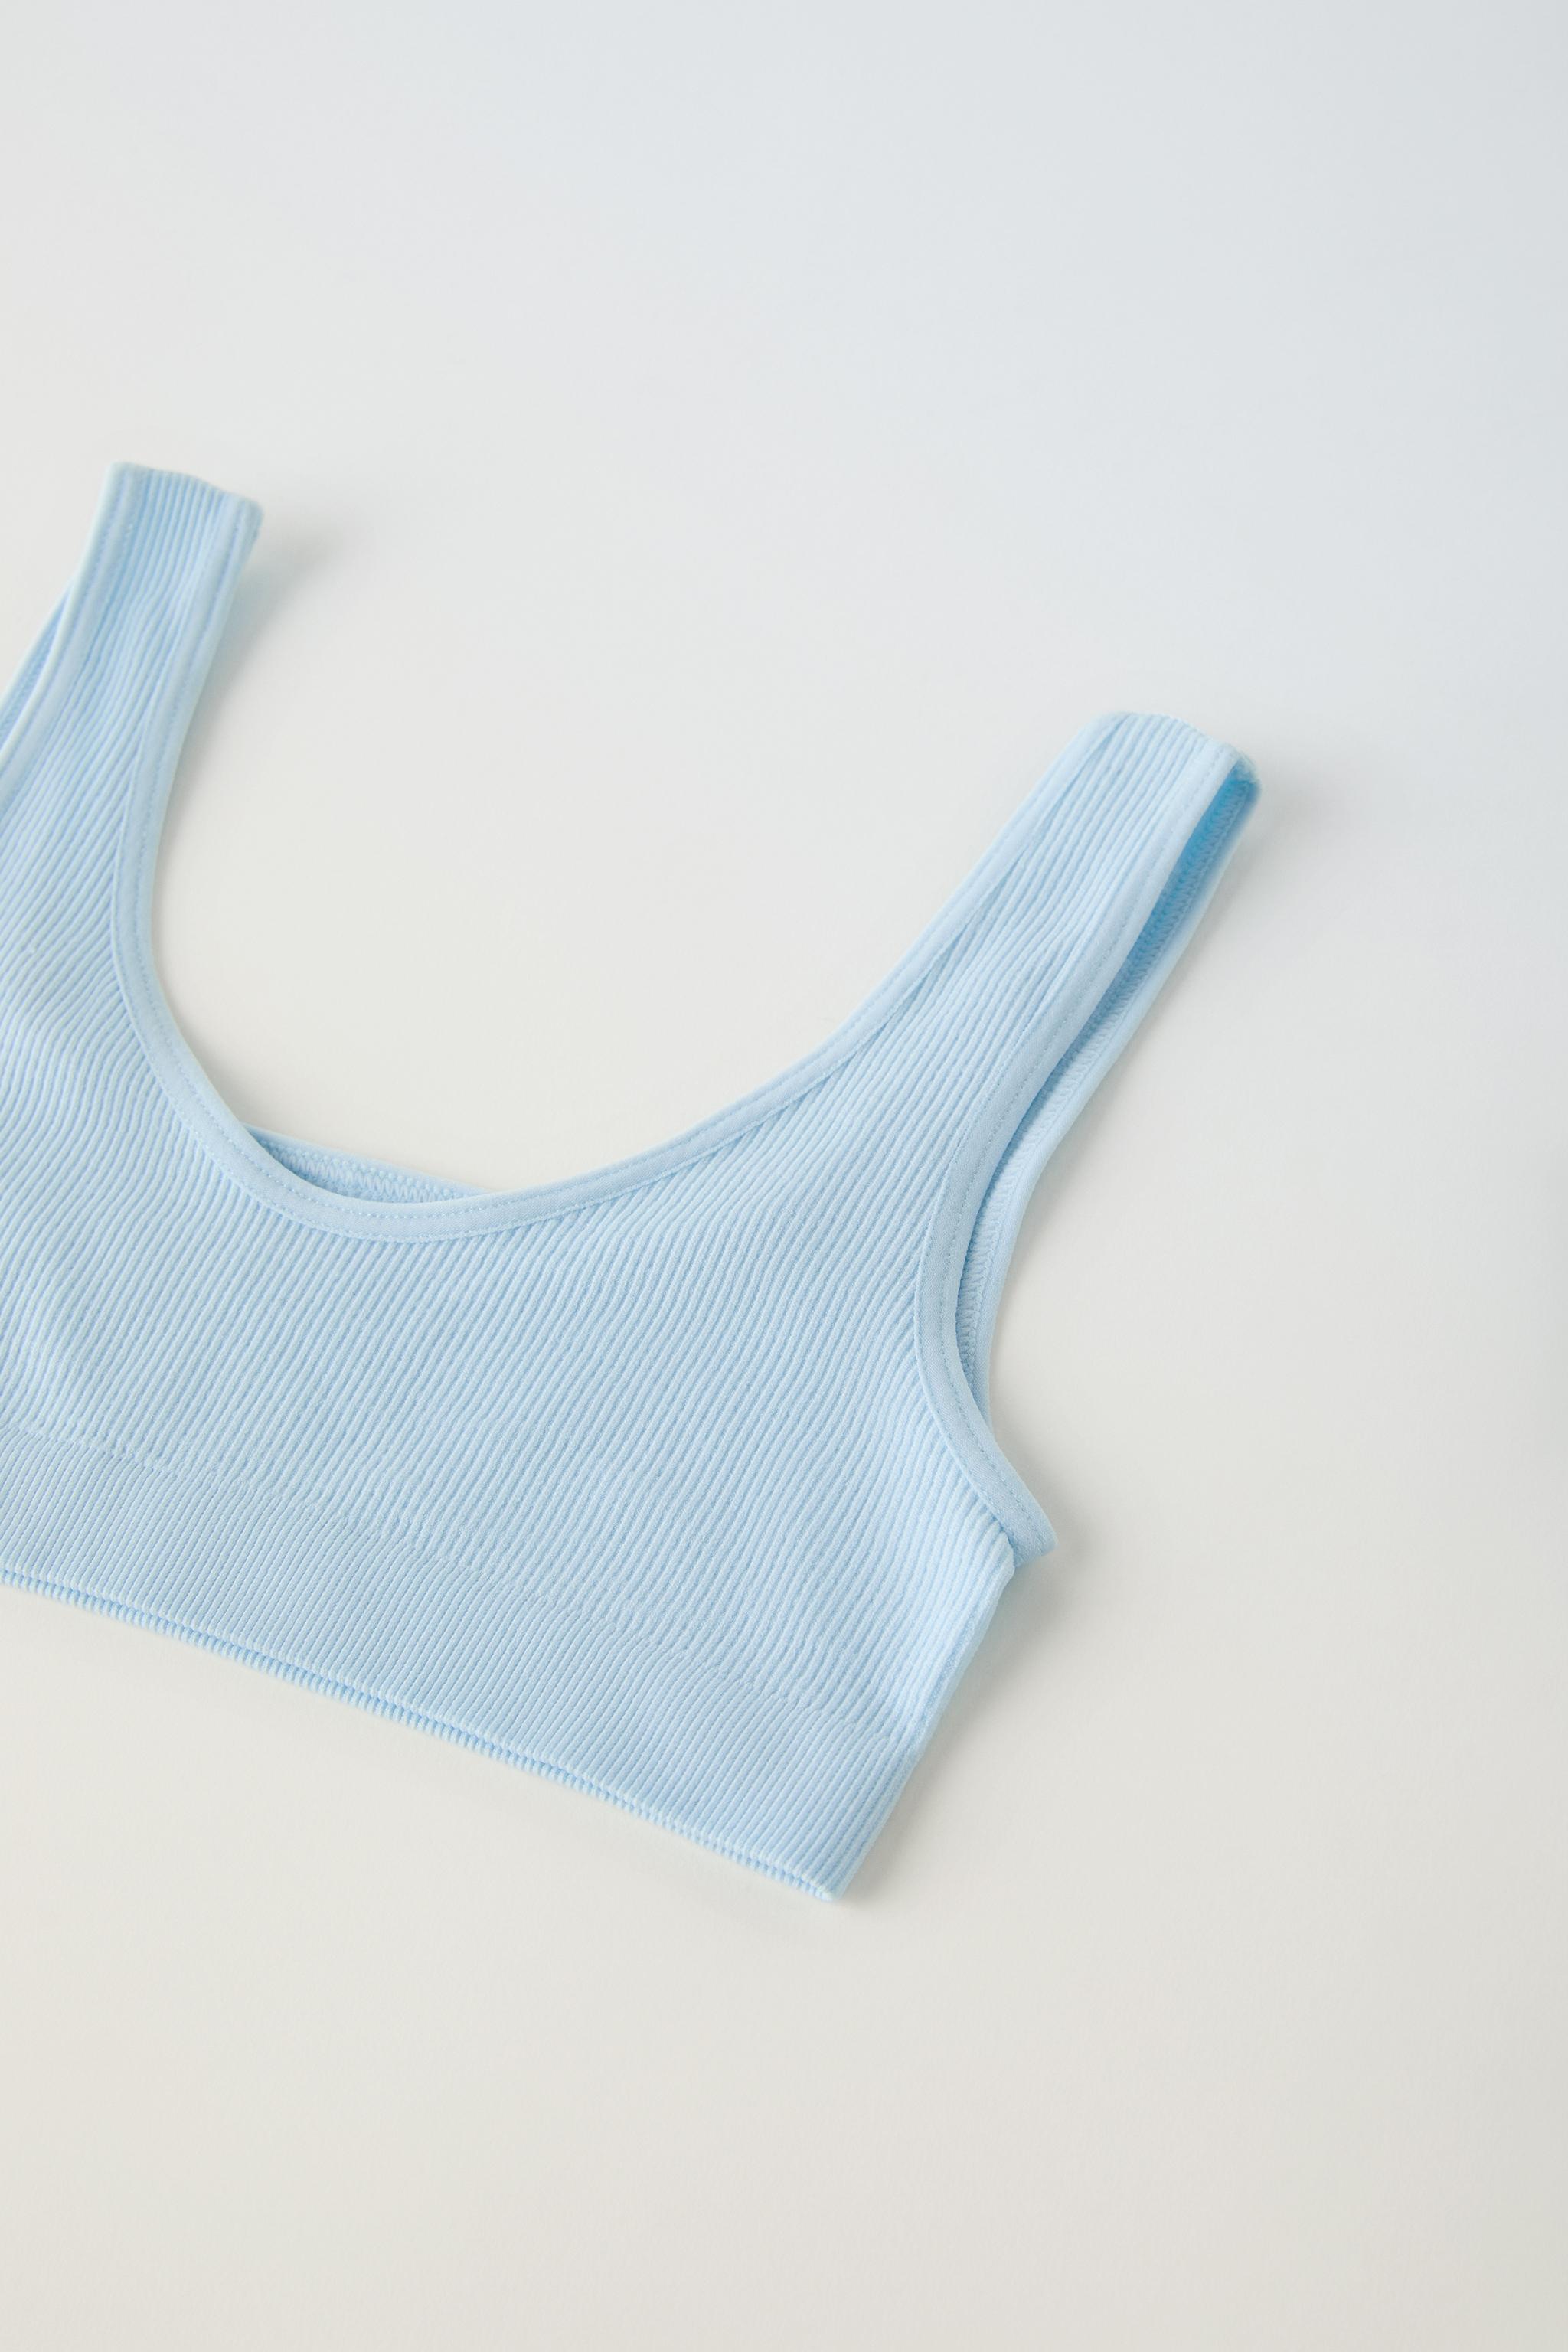 Bralux White And Blue Cotton Pack Of 2 T-Shirt Bra